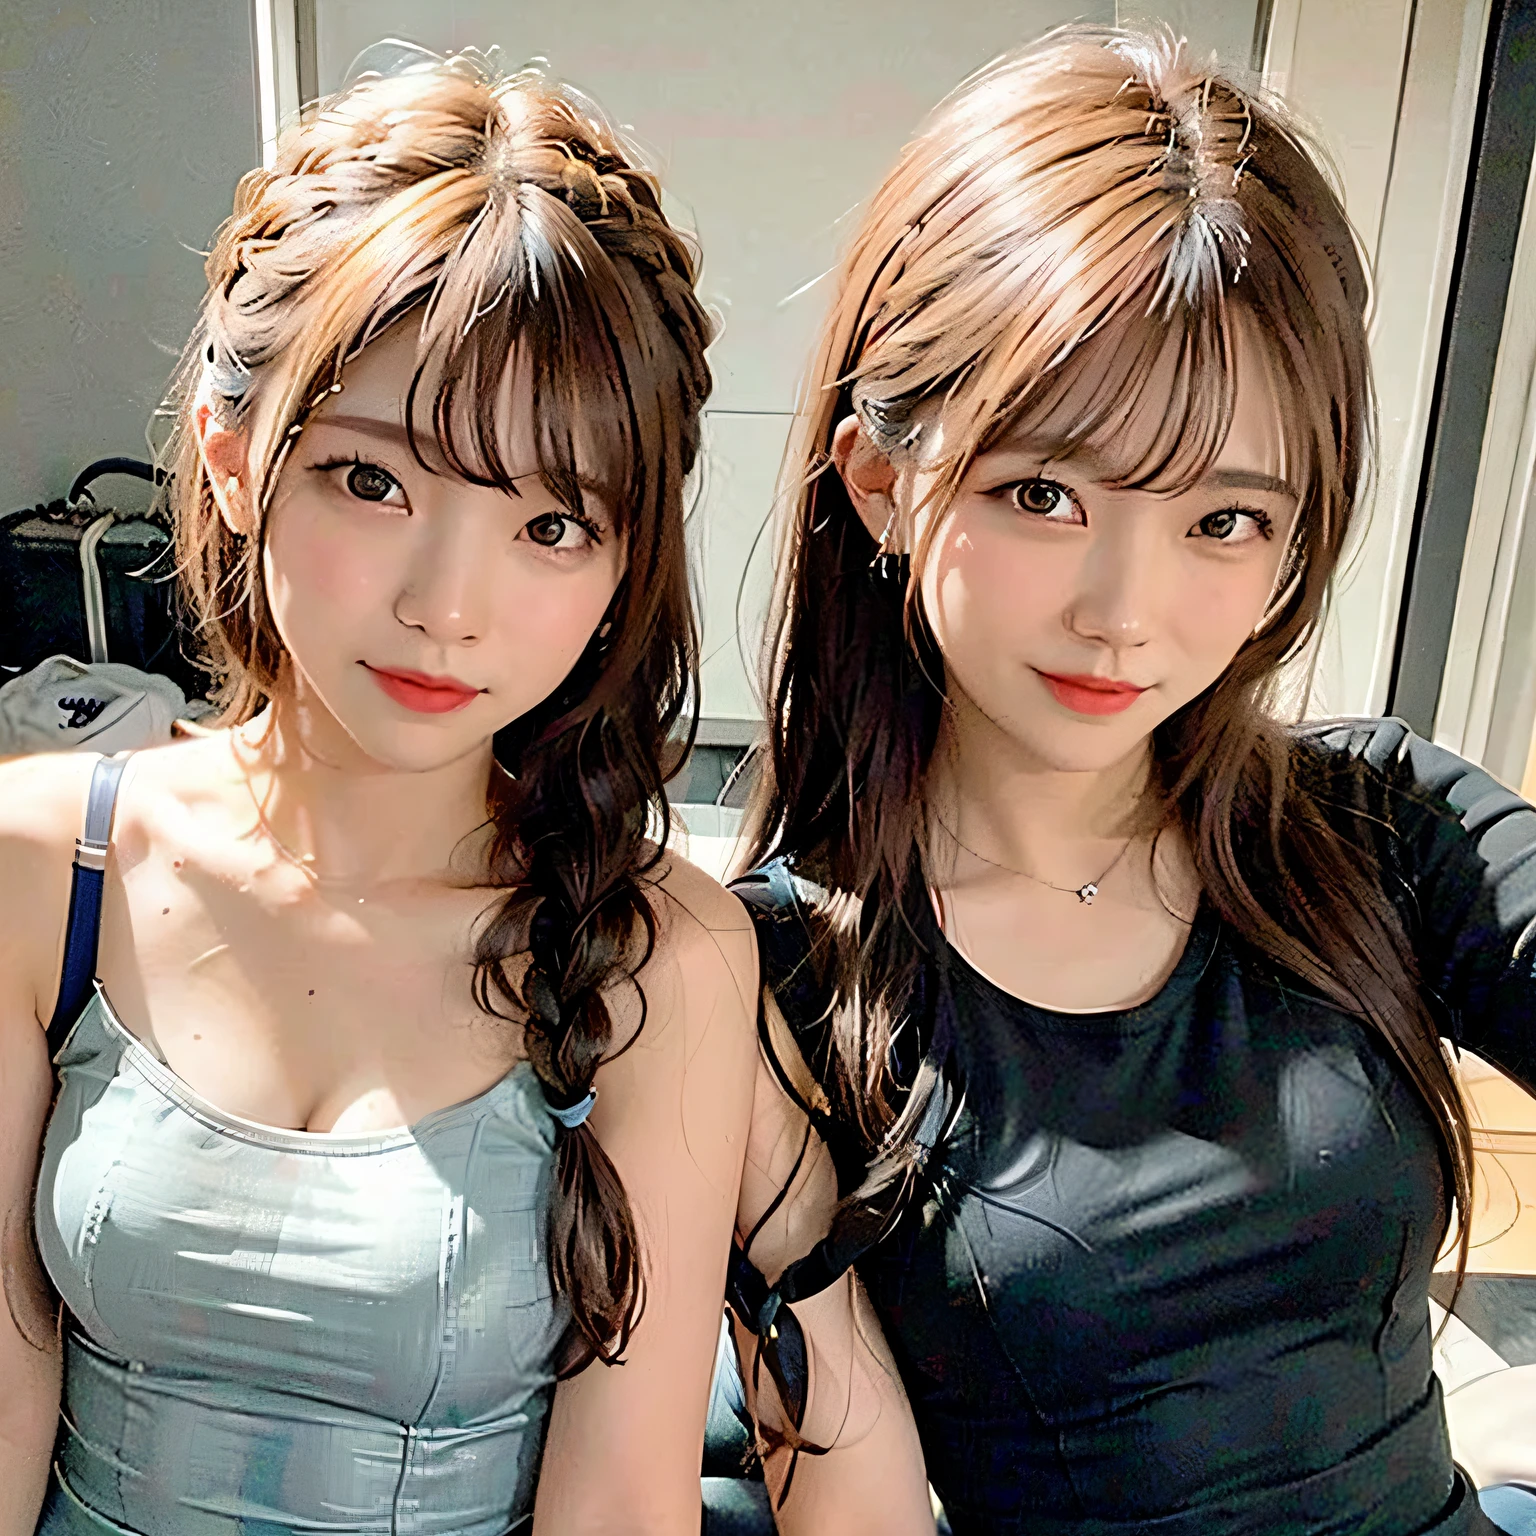 Braided twin-tailed hairstyles, 2 girls in、